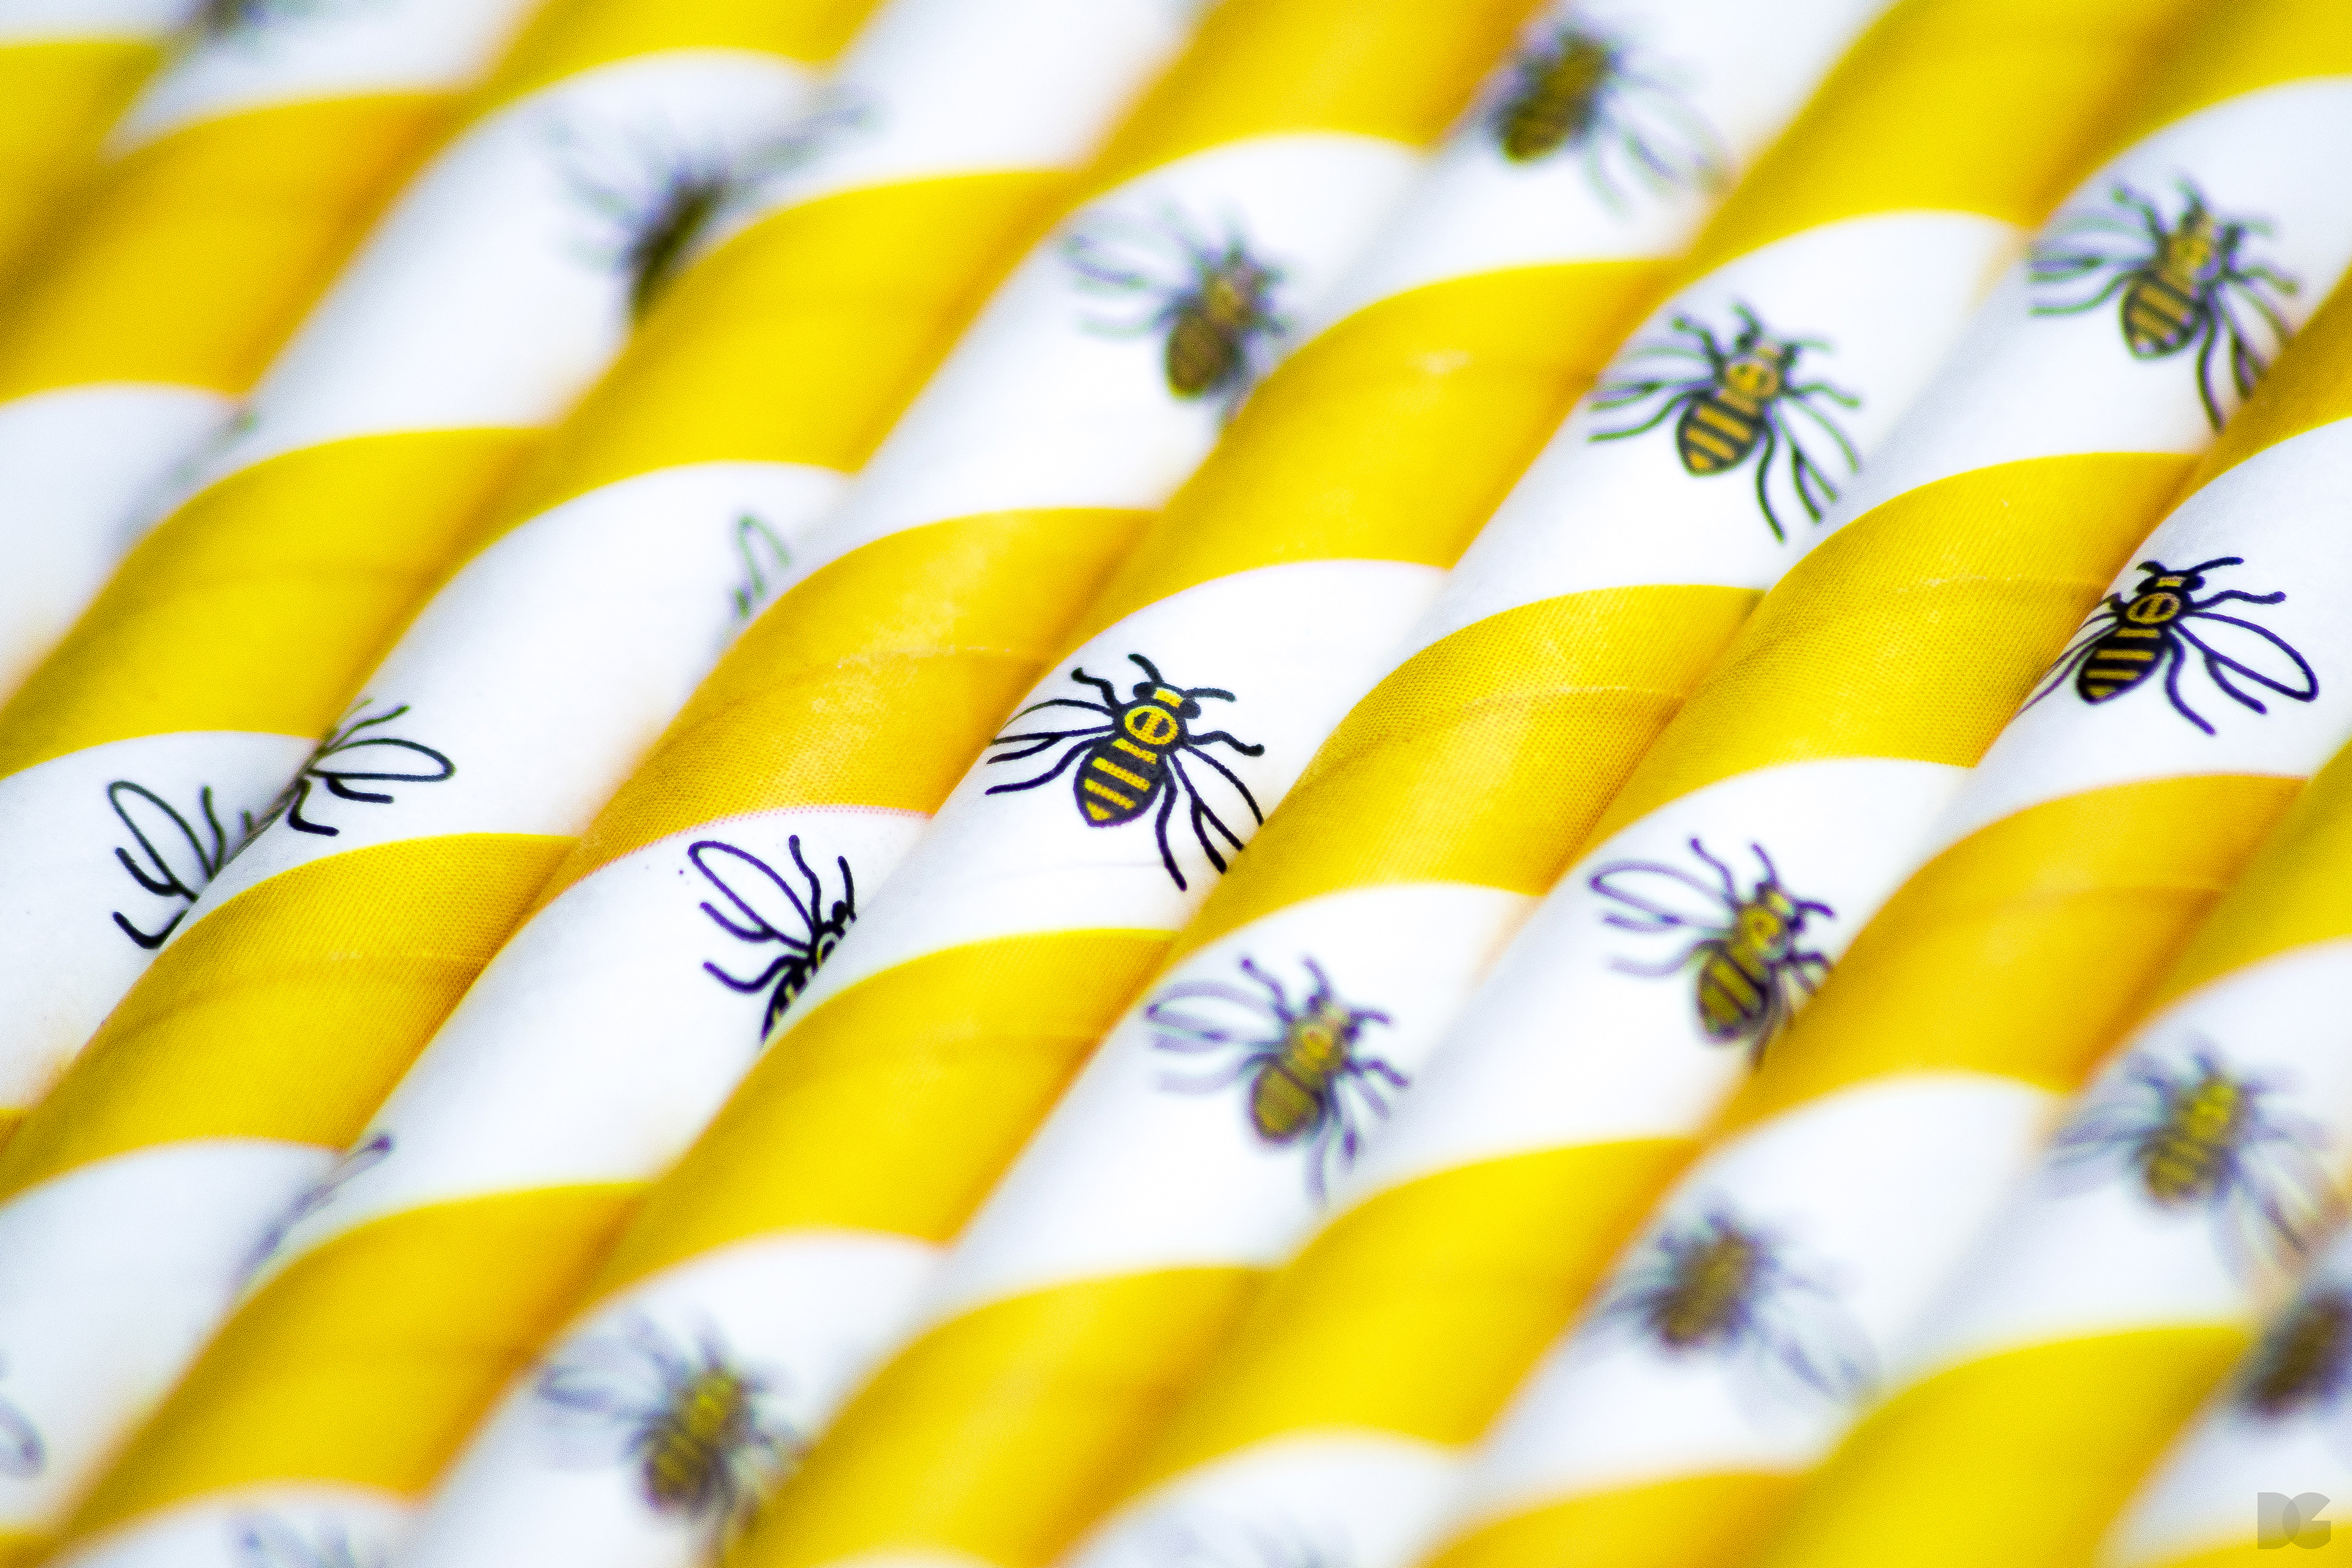 David Gilmore Design - The Manchester Bee Paper Straw